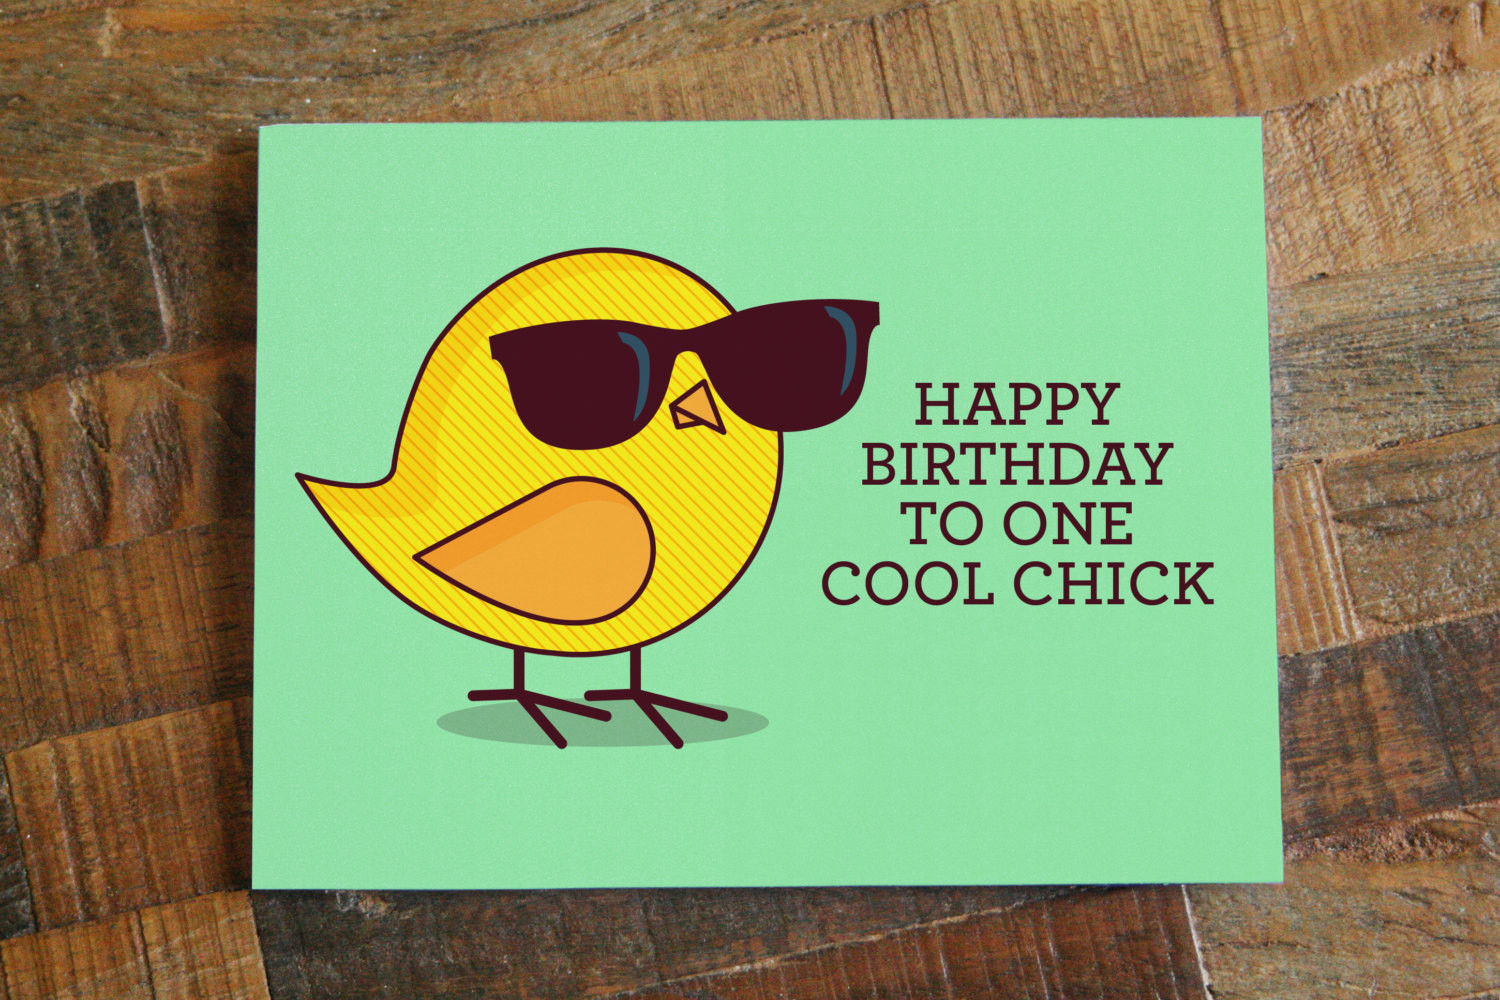 Happy Birthday Cards For Her Funny
 Funny Birthday Card For Her "Happy Birthday to e Cool